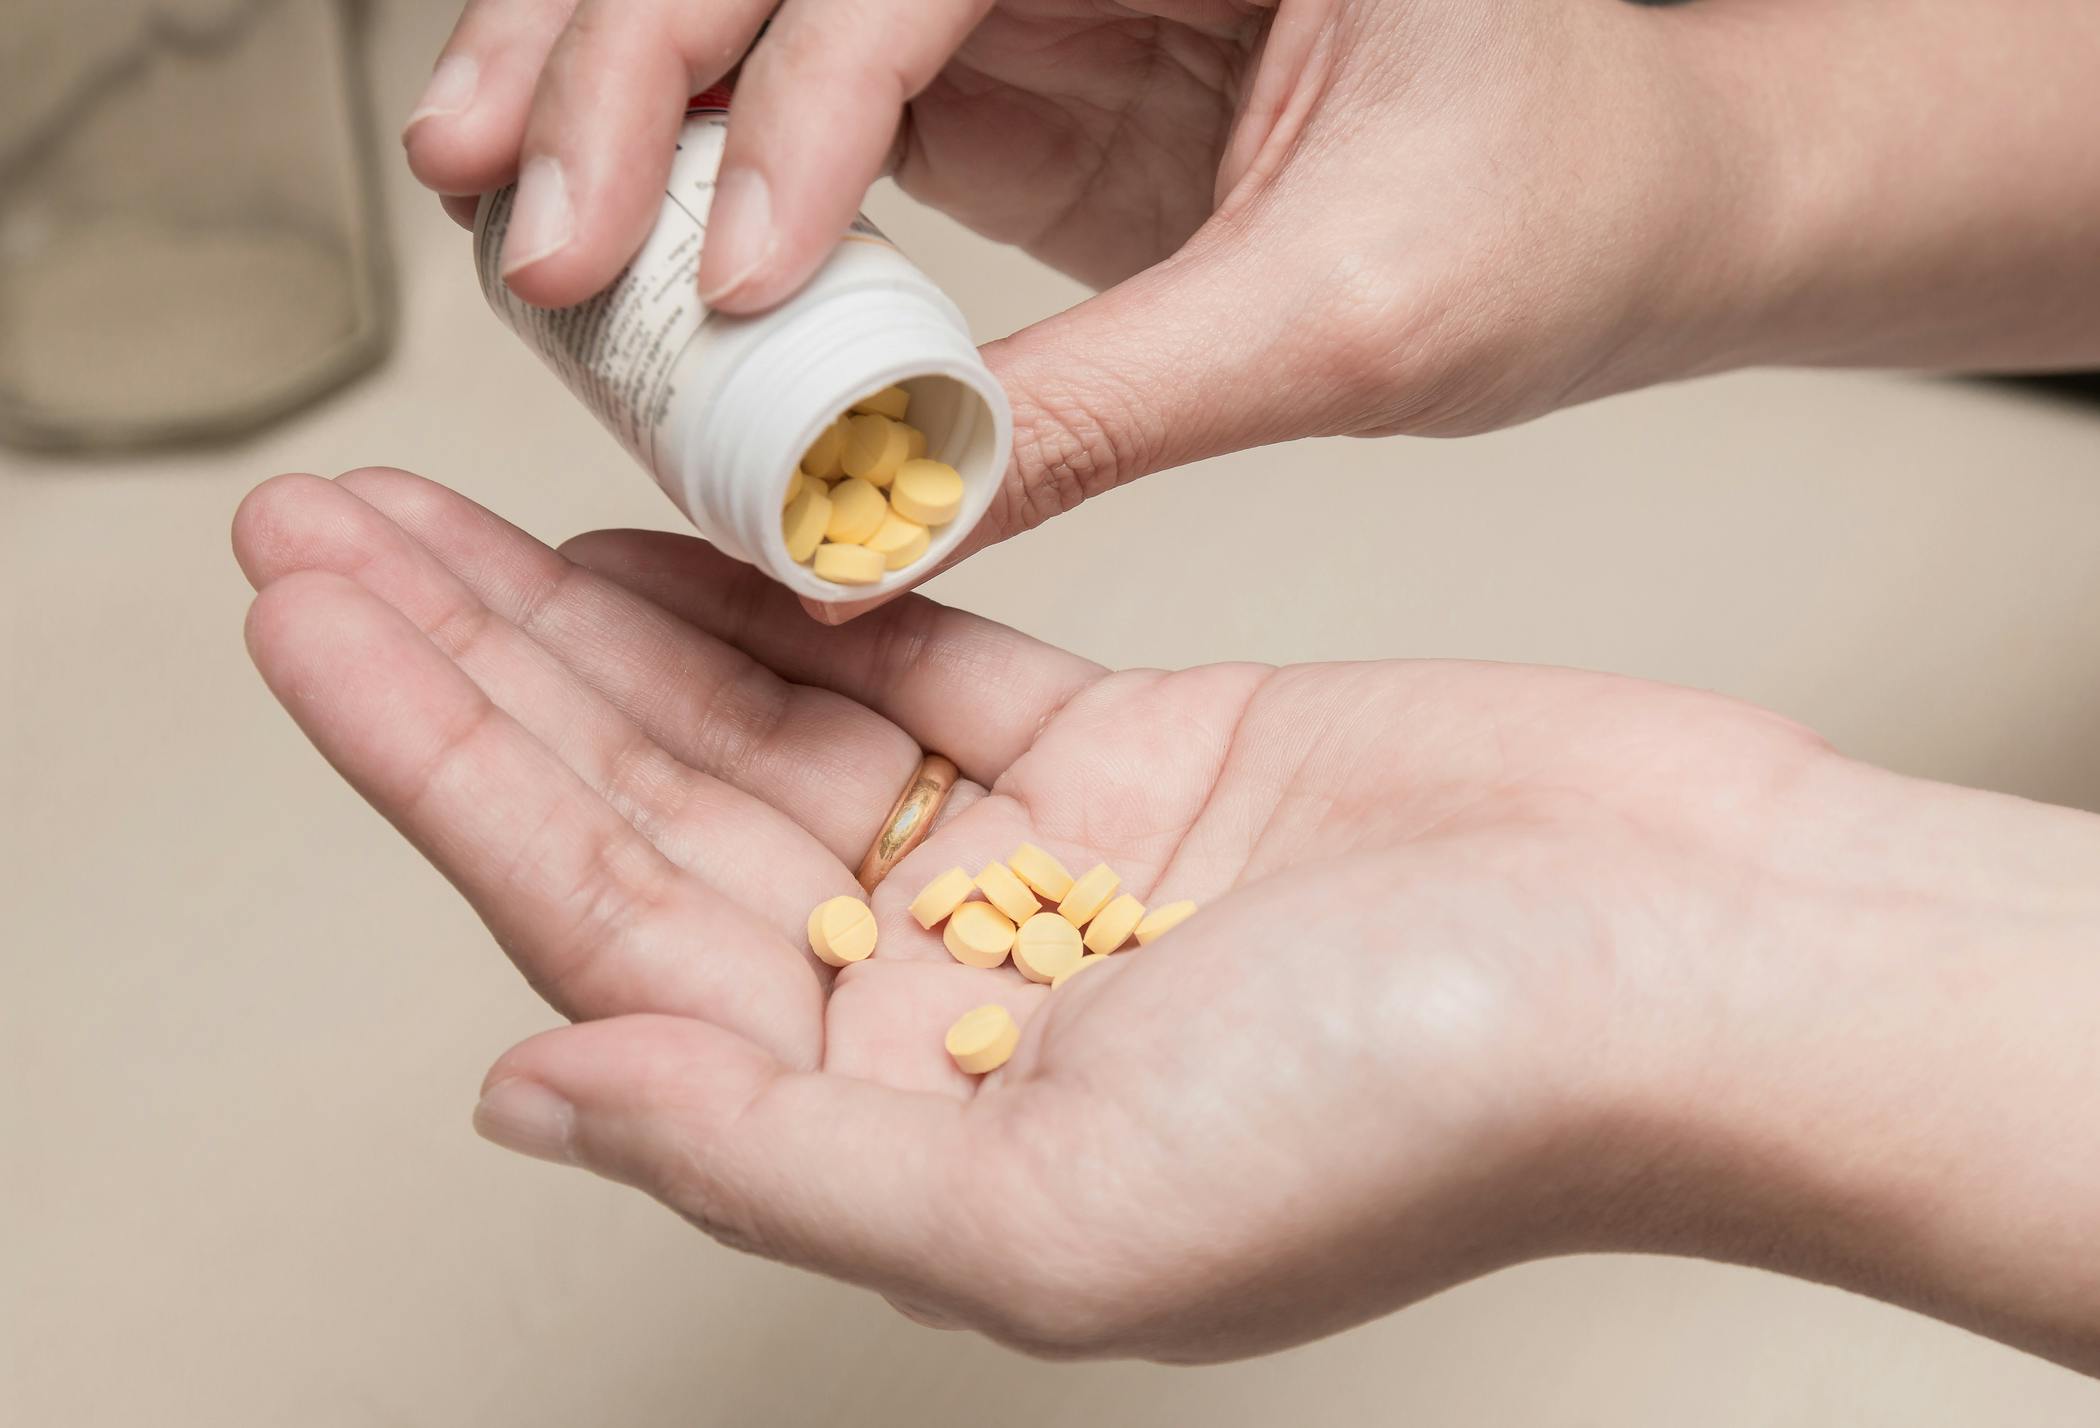 woman holding medicine bottle with yellow diazepam pills